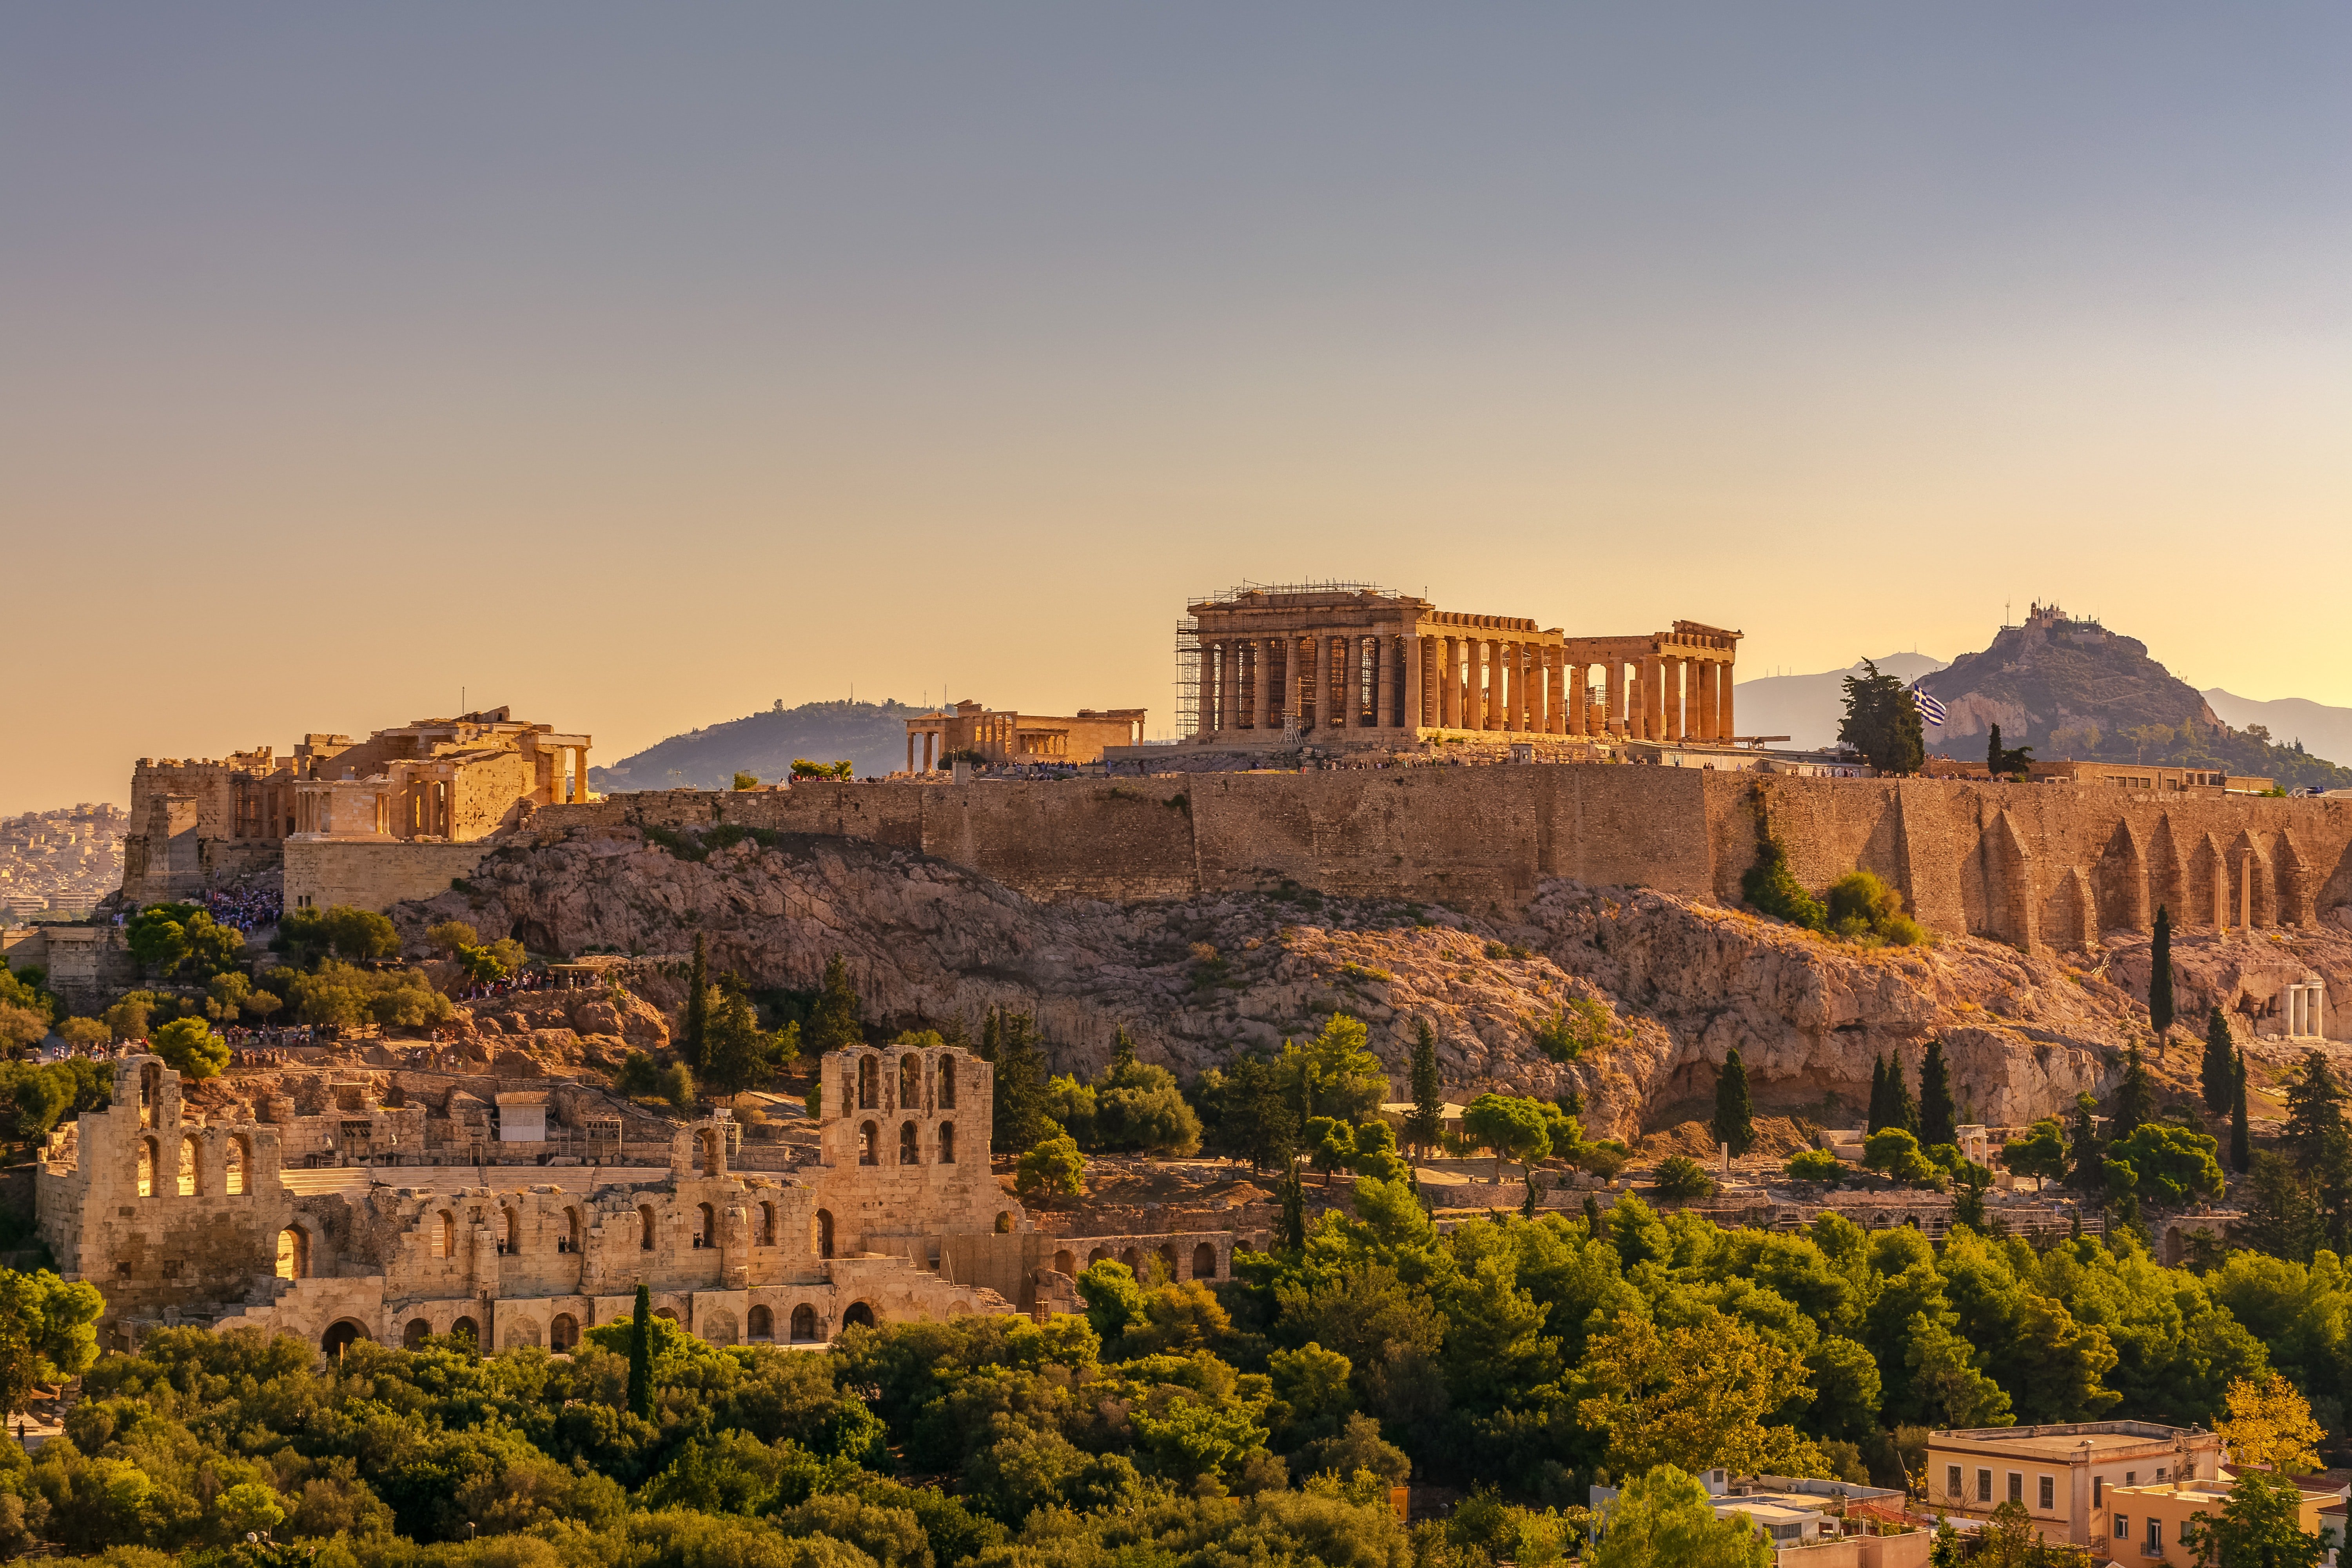 The ancient Acropolis on top of a hill in Athens at sunrise